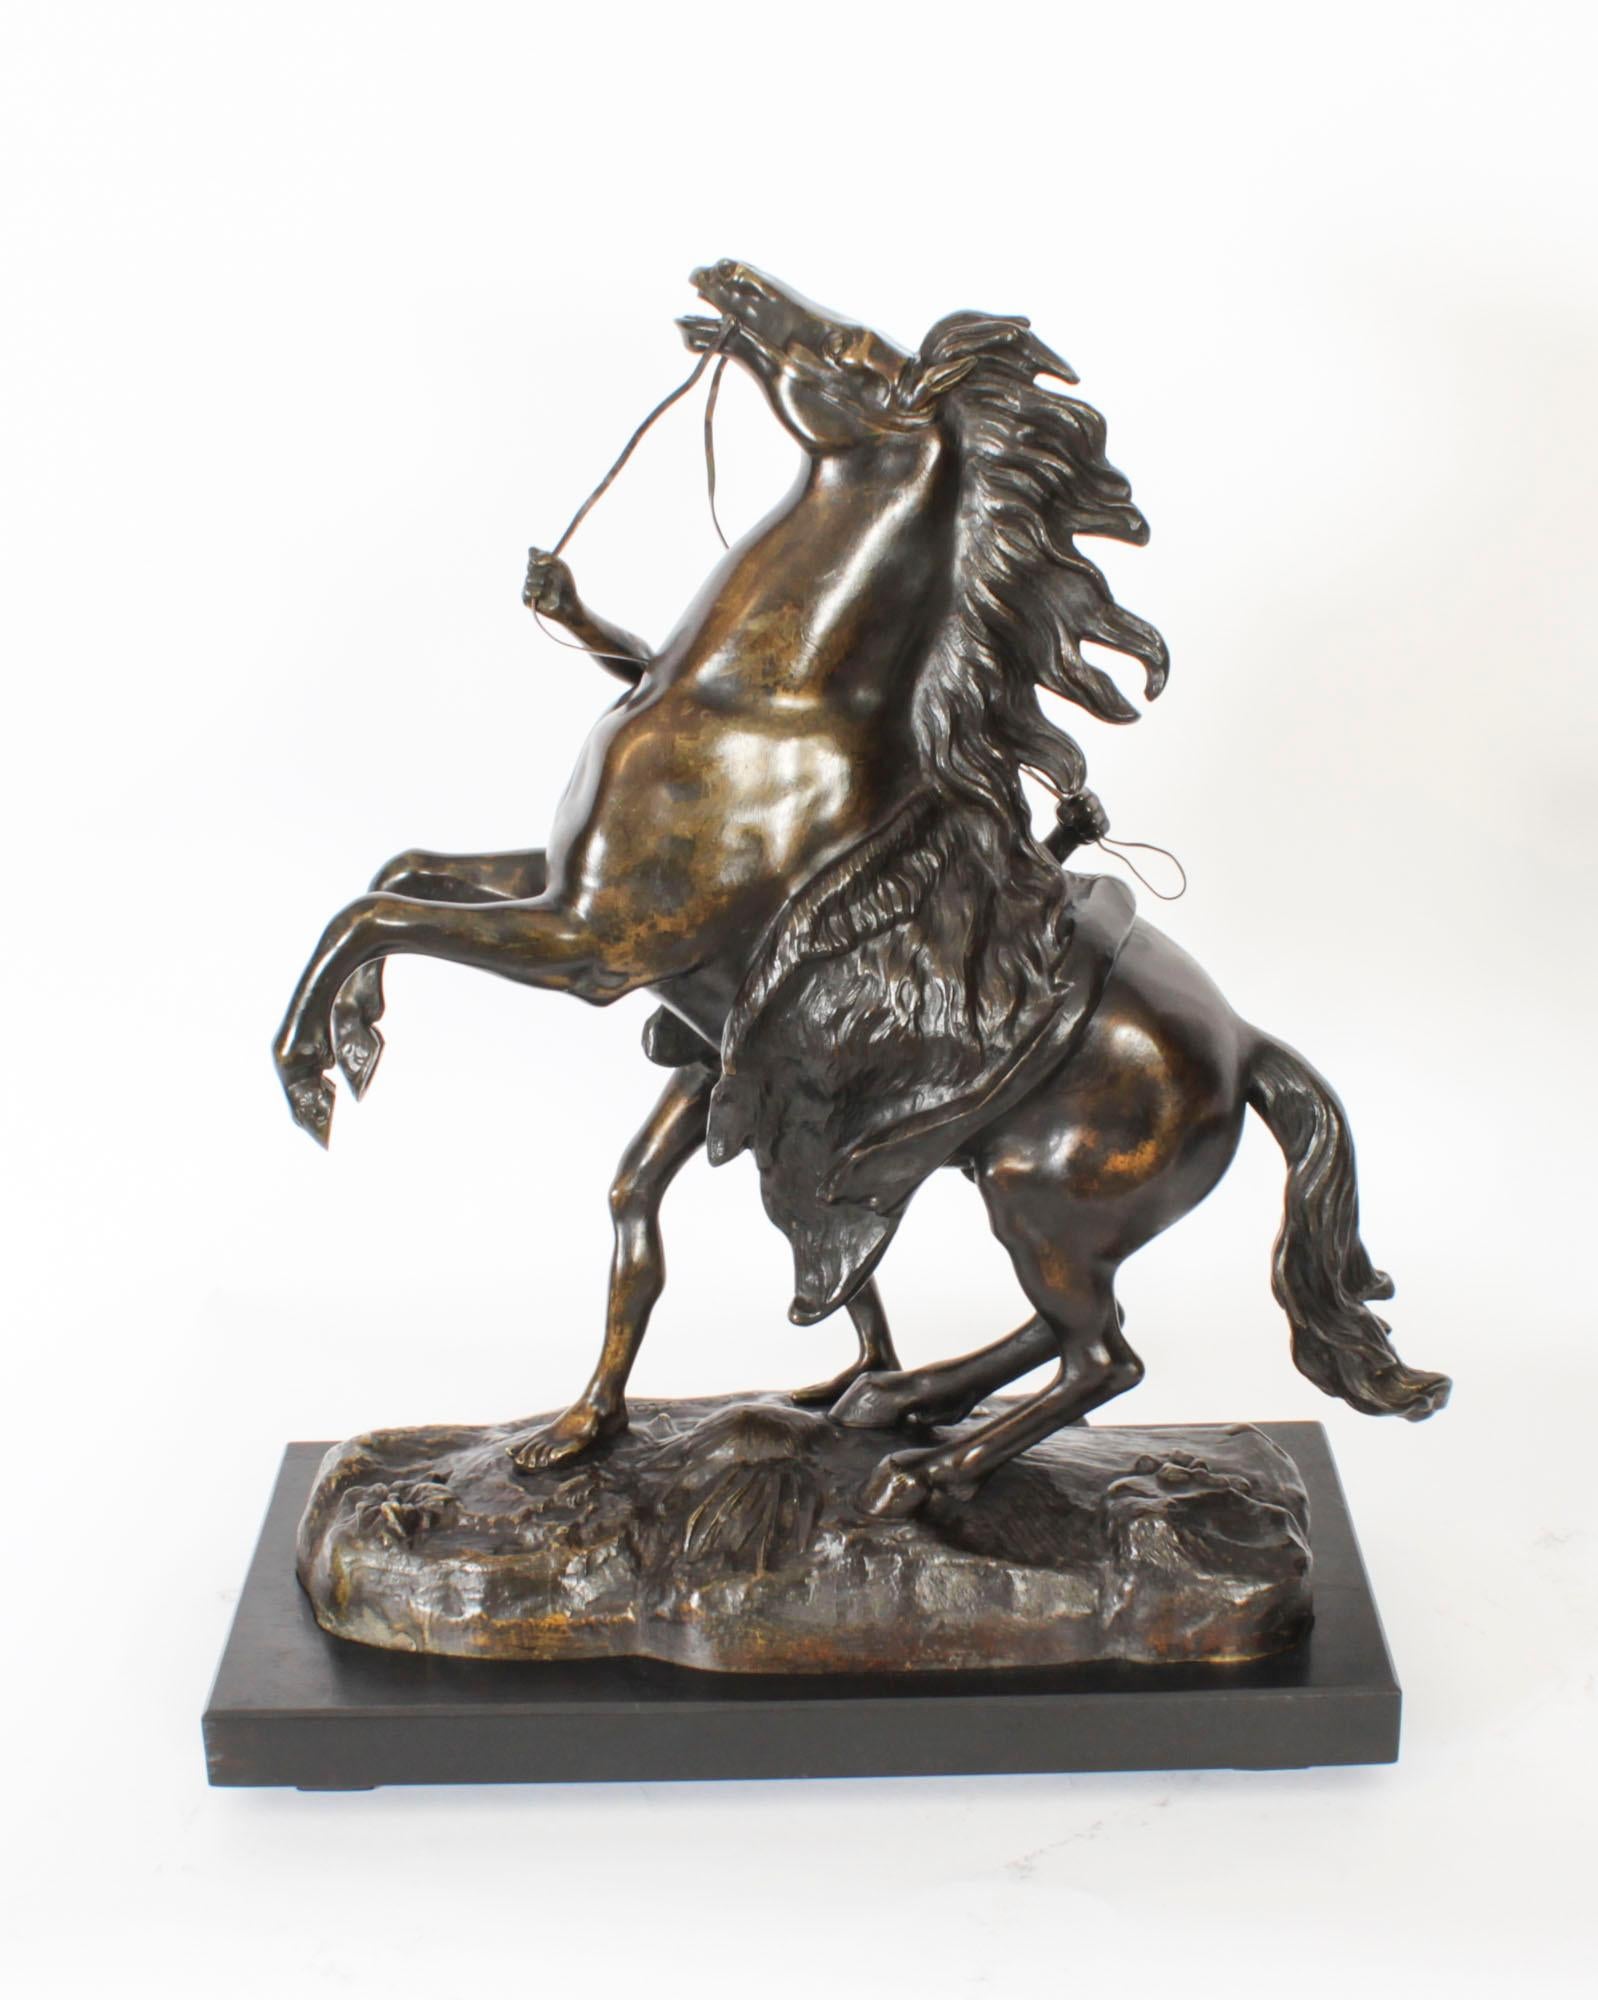 Antique Pair of French Bronze Marly Horses Sculptures by Cousteau 19th Century For Sale 4